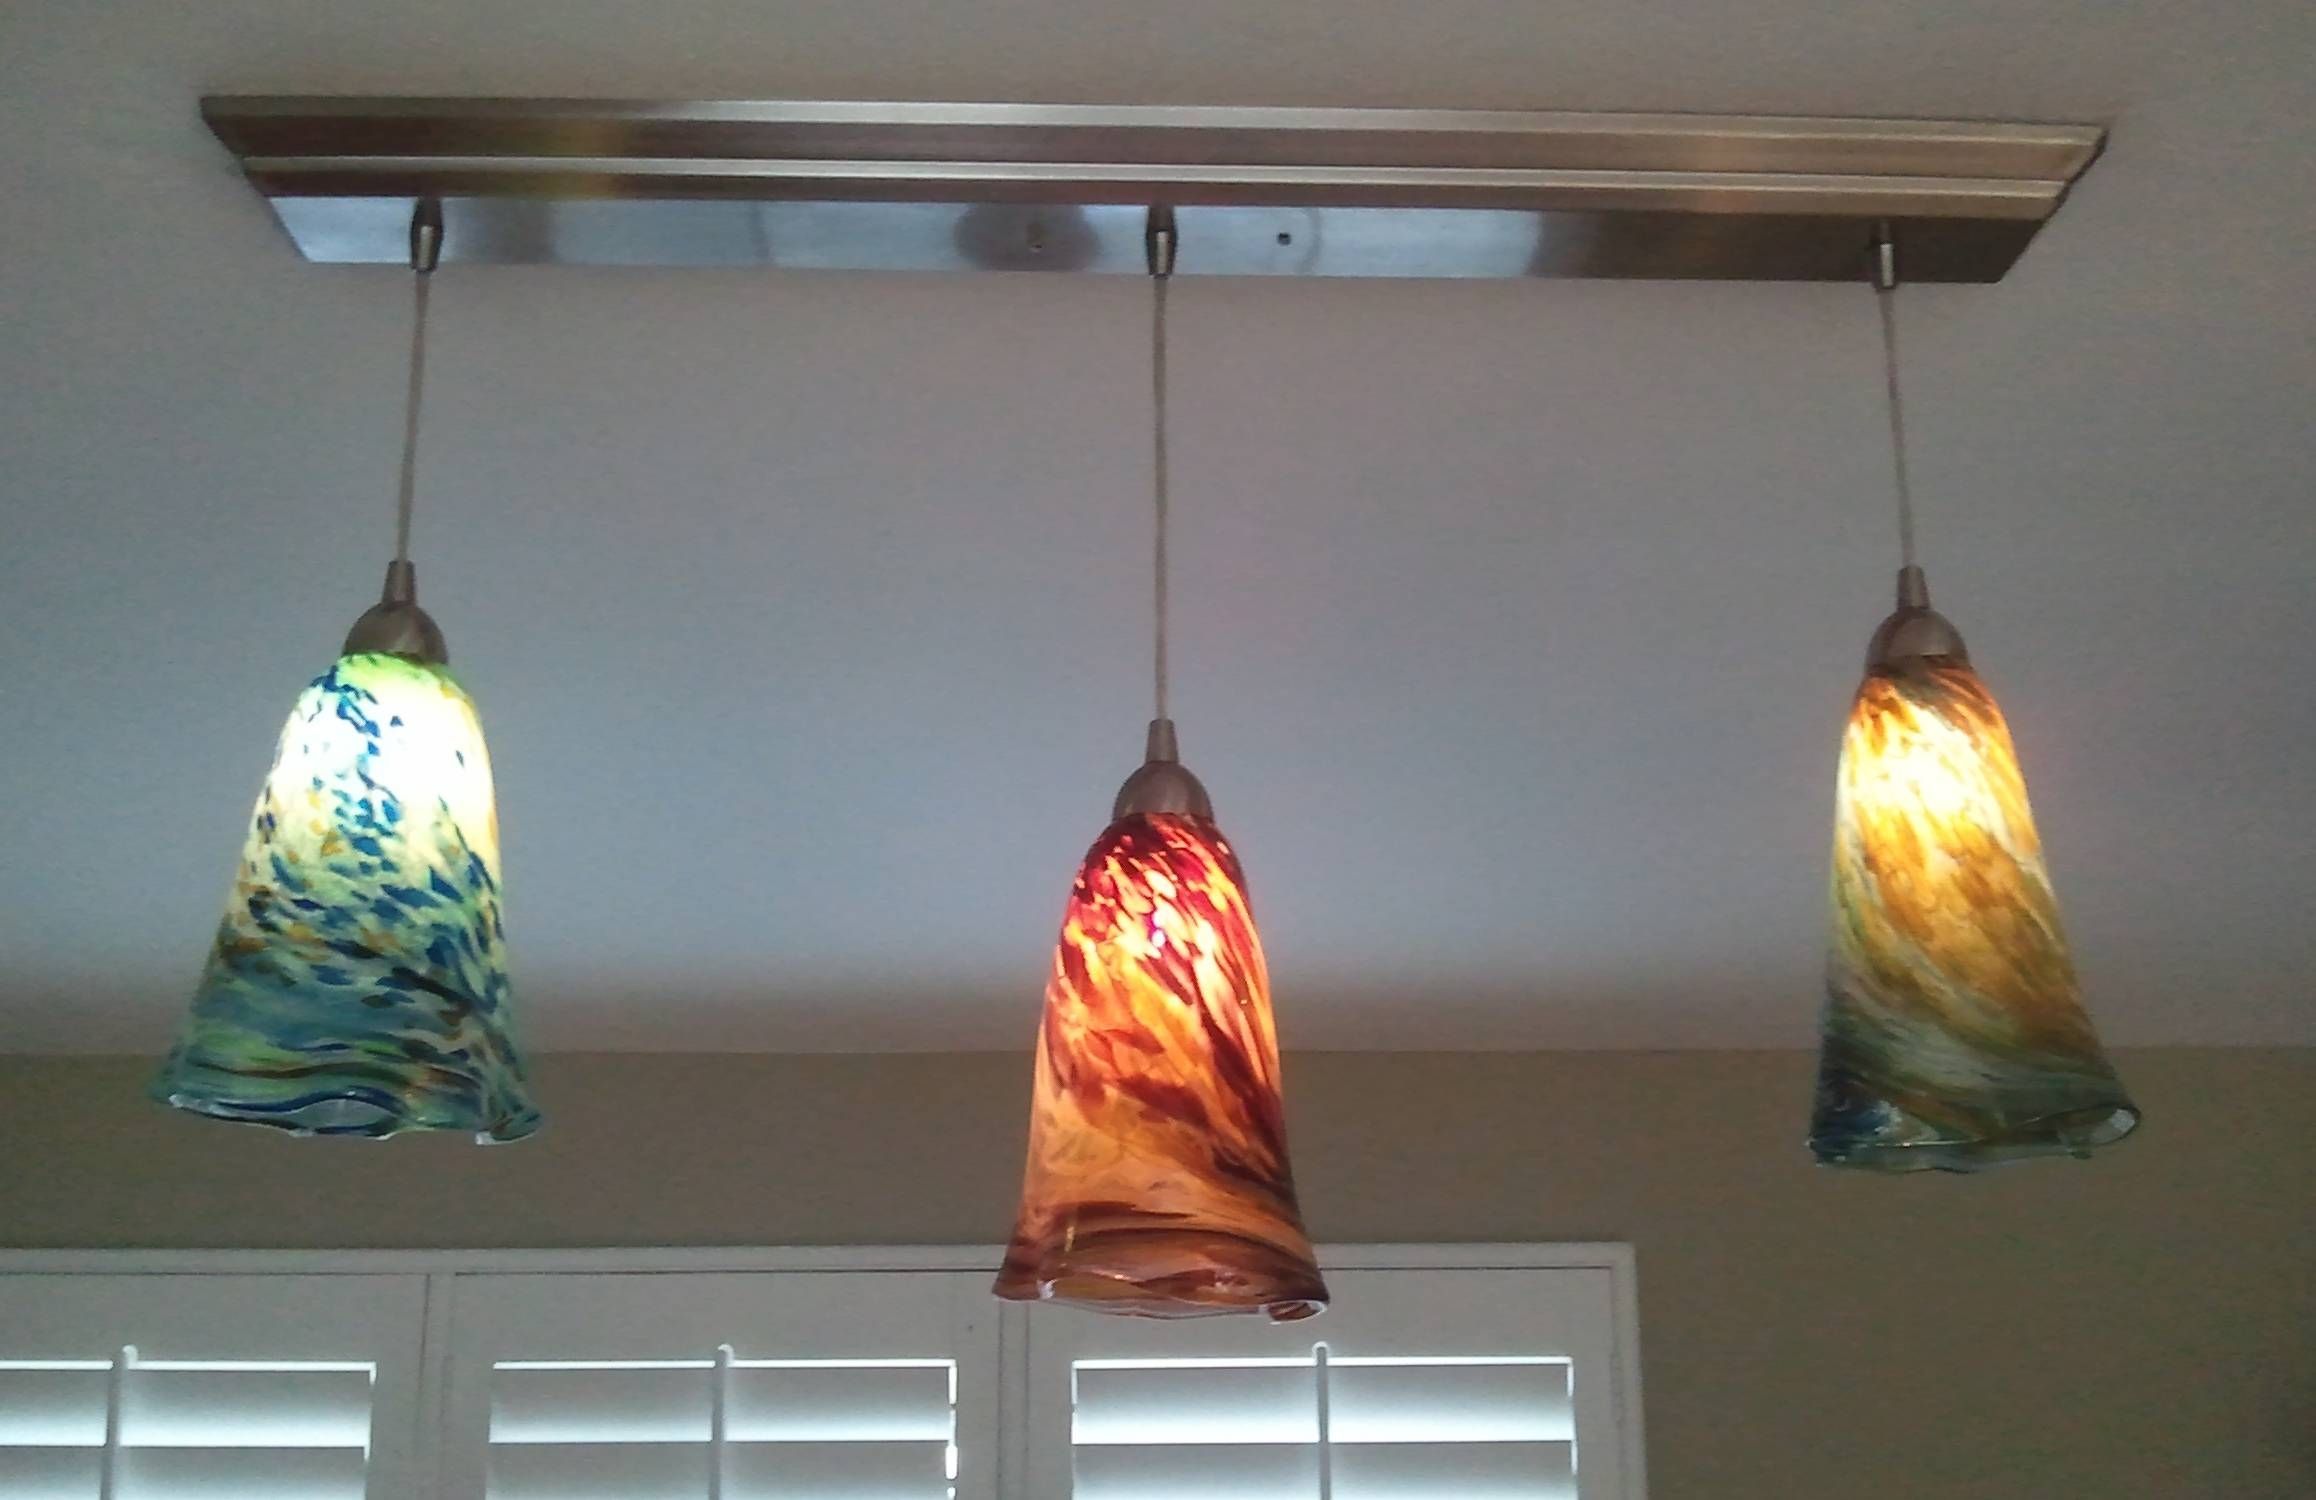 Fresh Replacement Glass Shades For Pendant Lights 36 About Remodel Within Glass Globes For Pendant Lights (View 4 of 15)